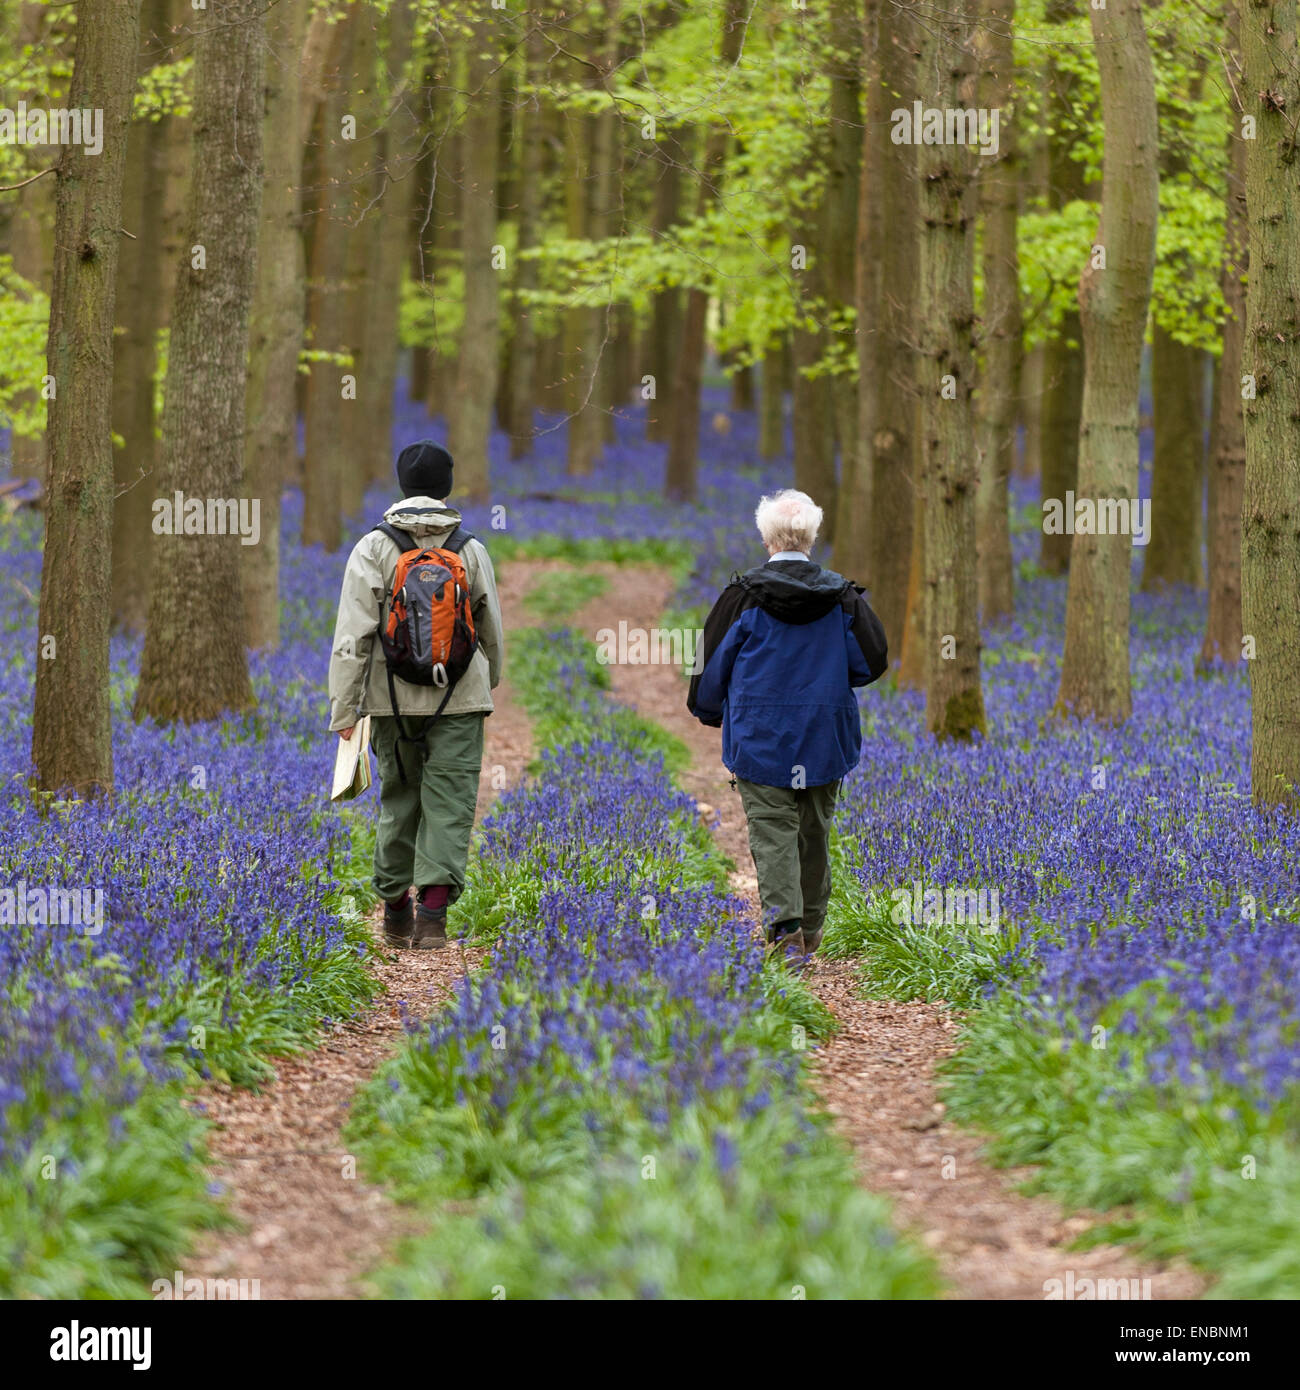 Ringshall, Hertfordshire, UK. 1 May 2015. A pair of hikers walk through the bluebells. Just in time for the early May bank holiday, the bluebells are nearly in full bloom in Dockey Wood, part of the Ashridge Estate. This wood is renowned for its carpet of bluebells every spring and is regarded as one of the finest examples in the country.  Credit:  Stephen Chung / Alamy Live News Stock Photo